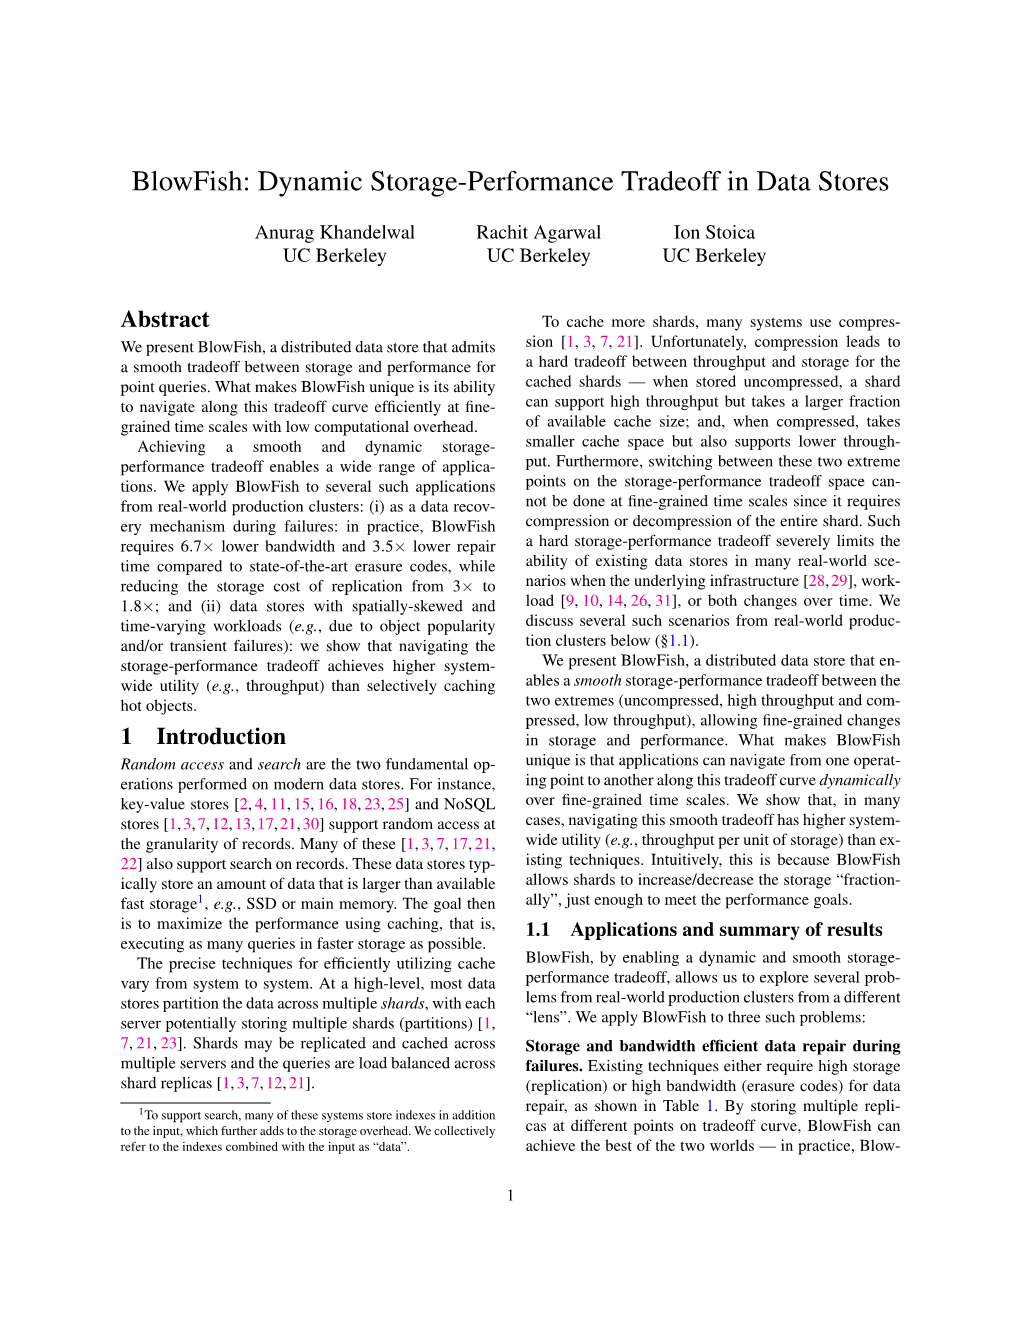 Dynamic Storage-Performance Tradeoff in Data Stores